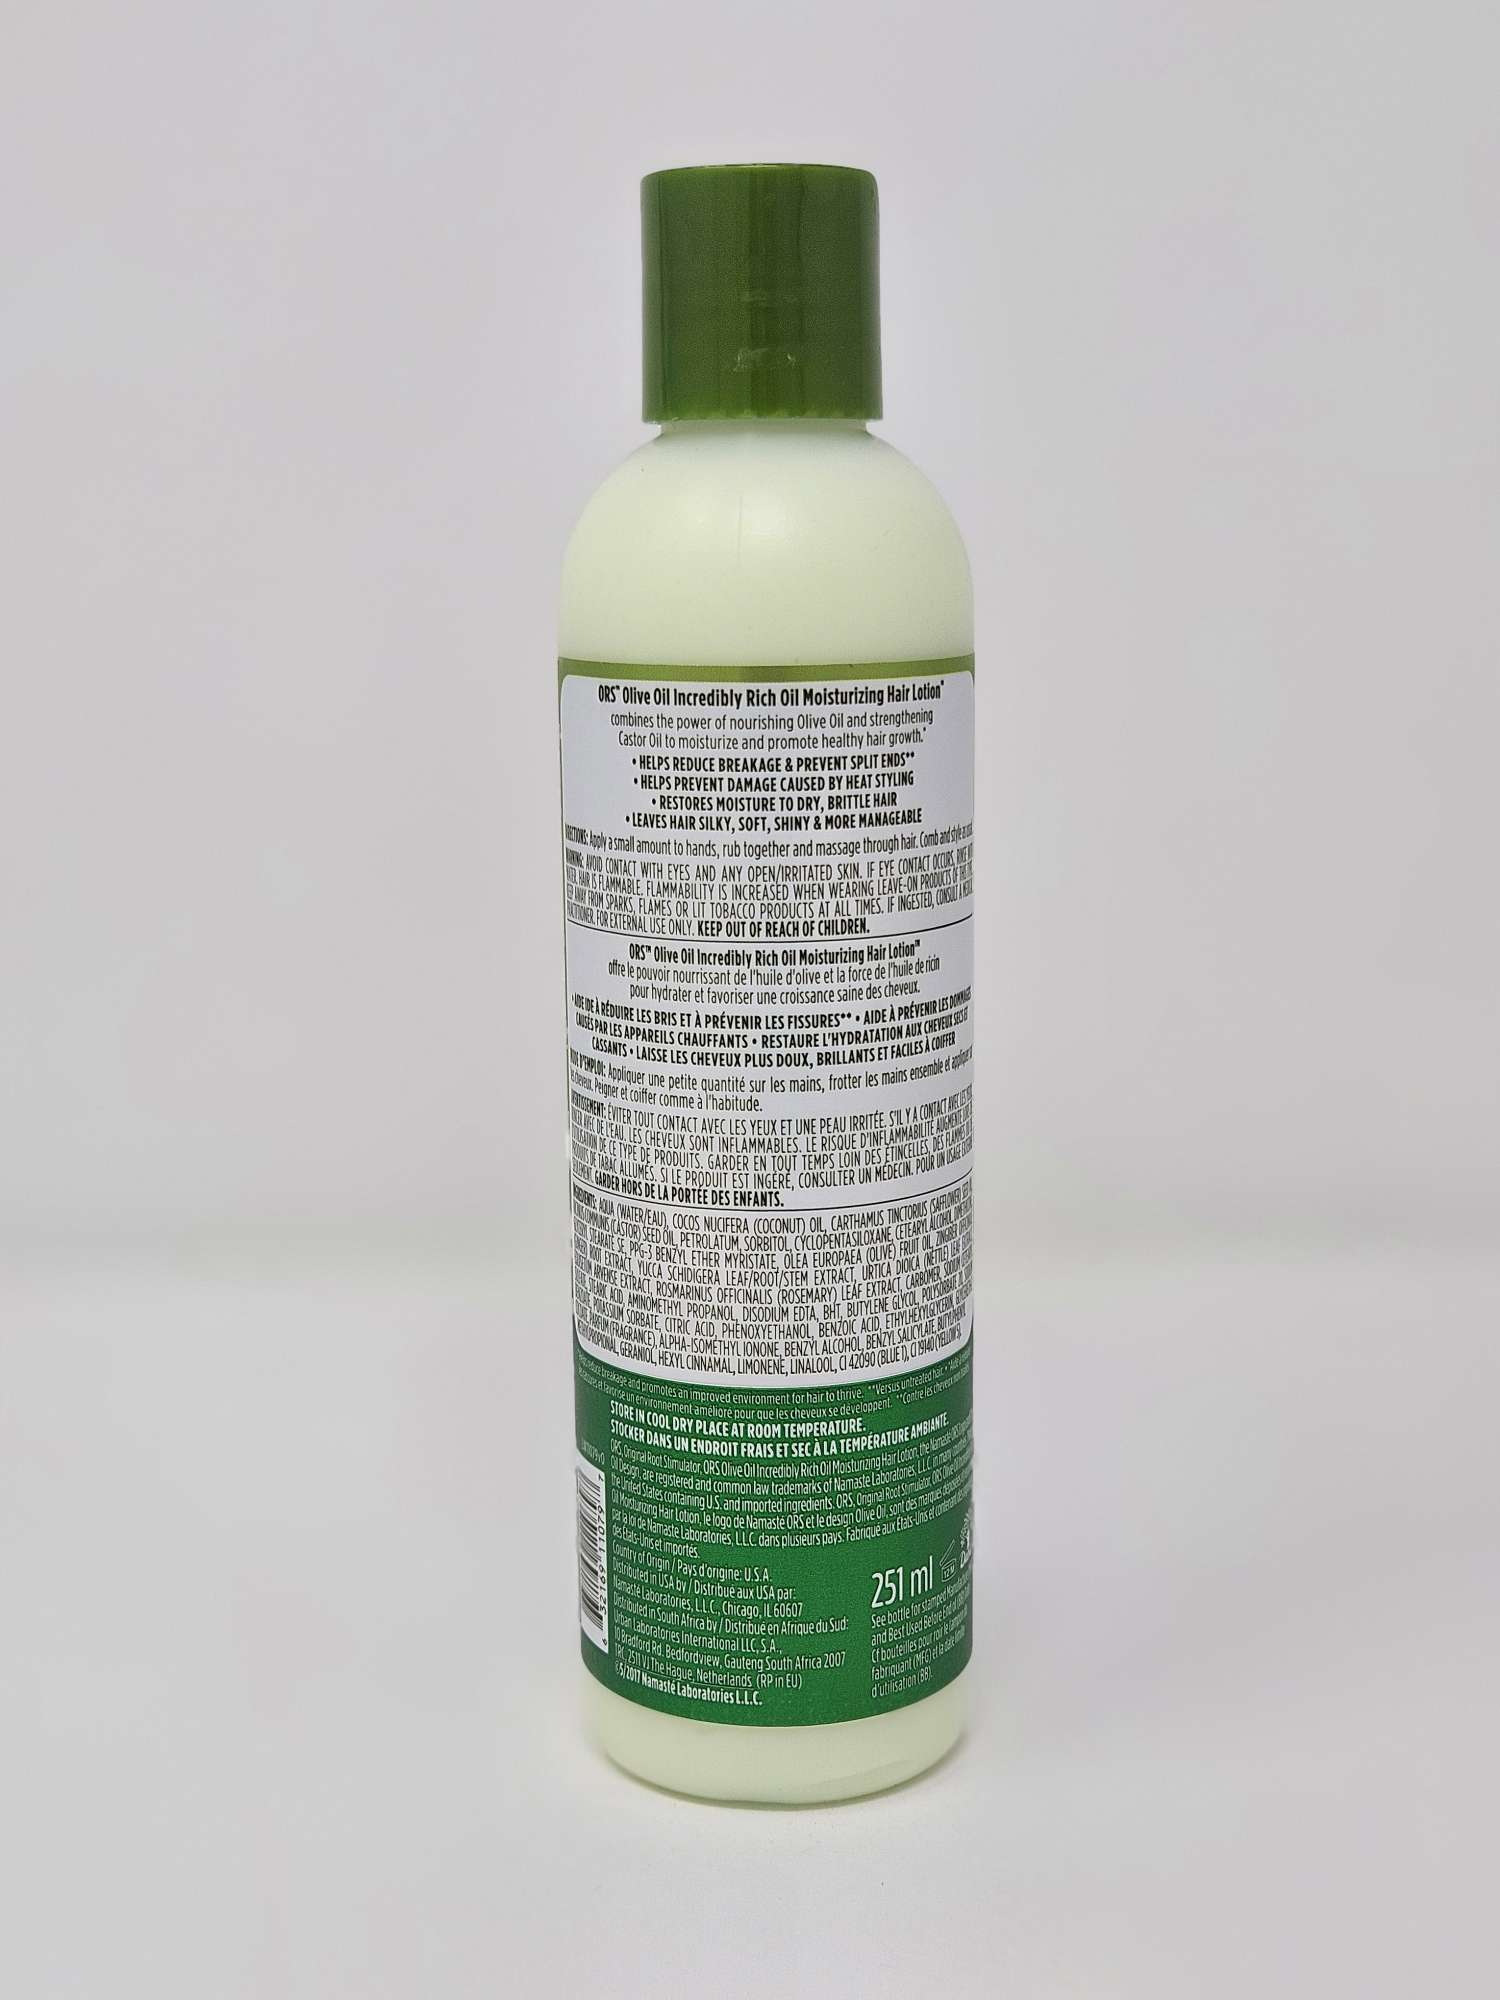 ORS Olive Oil Incredibly Rich Oil Moisturizing Hair Lotion - 8.5oz